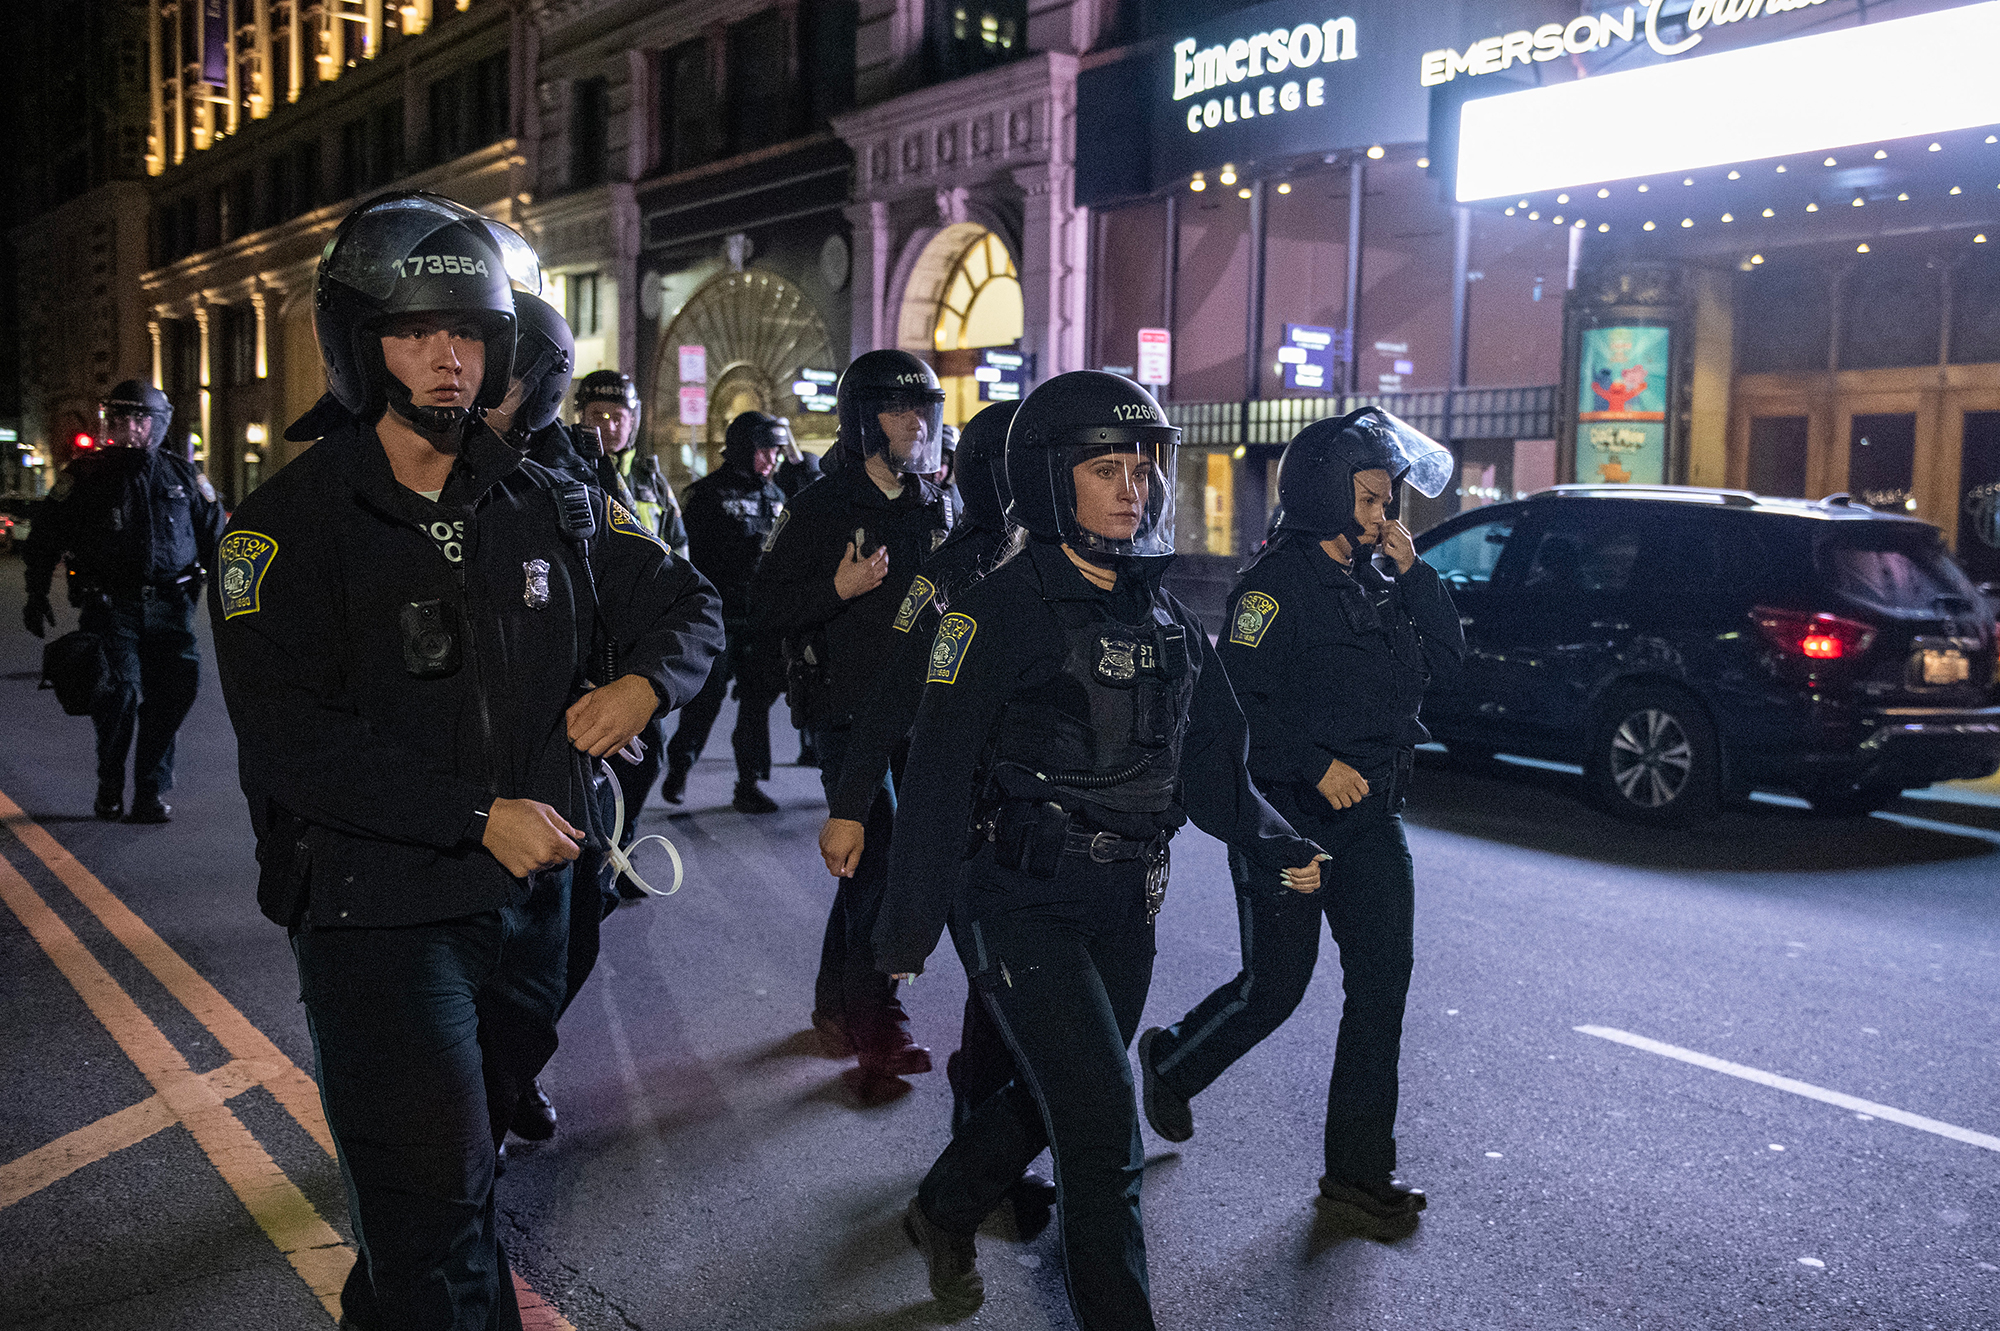 Police deploy to clear a pro-Palestinian protest camp at Emerson College in Boston, Massachusetts, on April 25. 